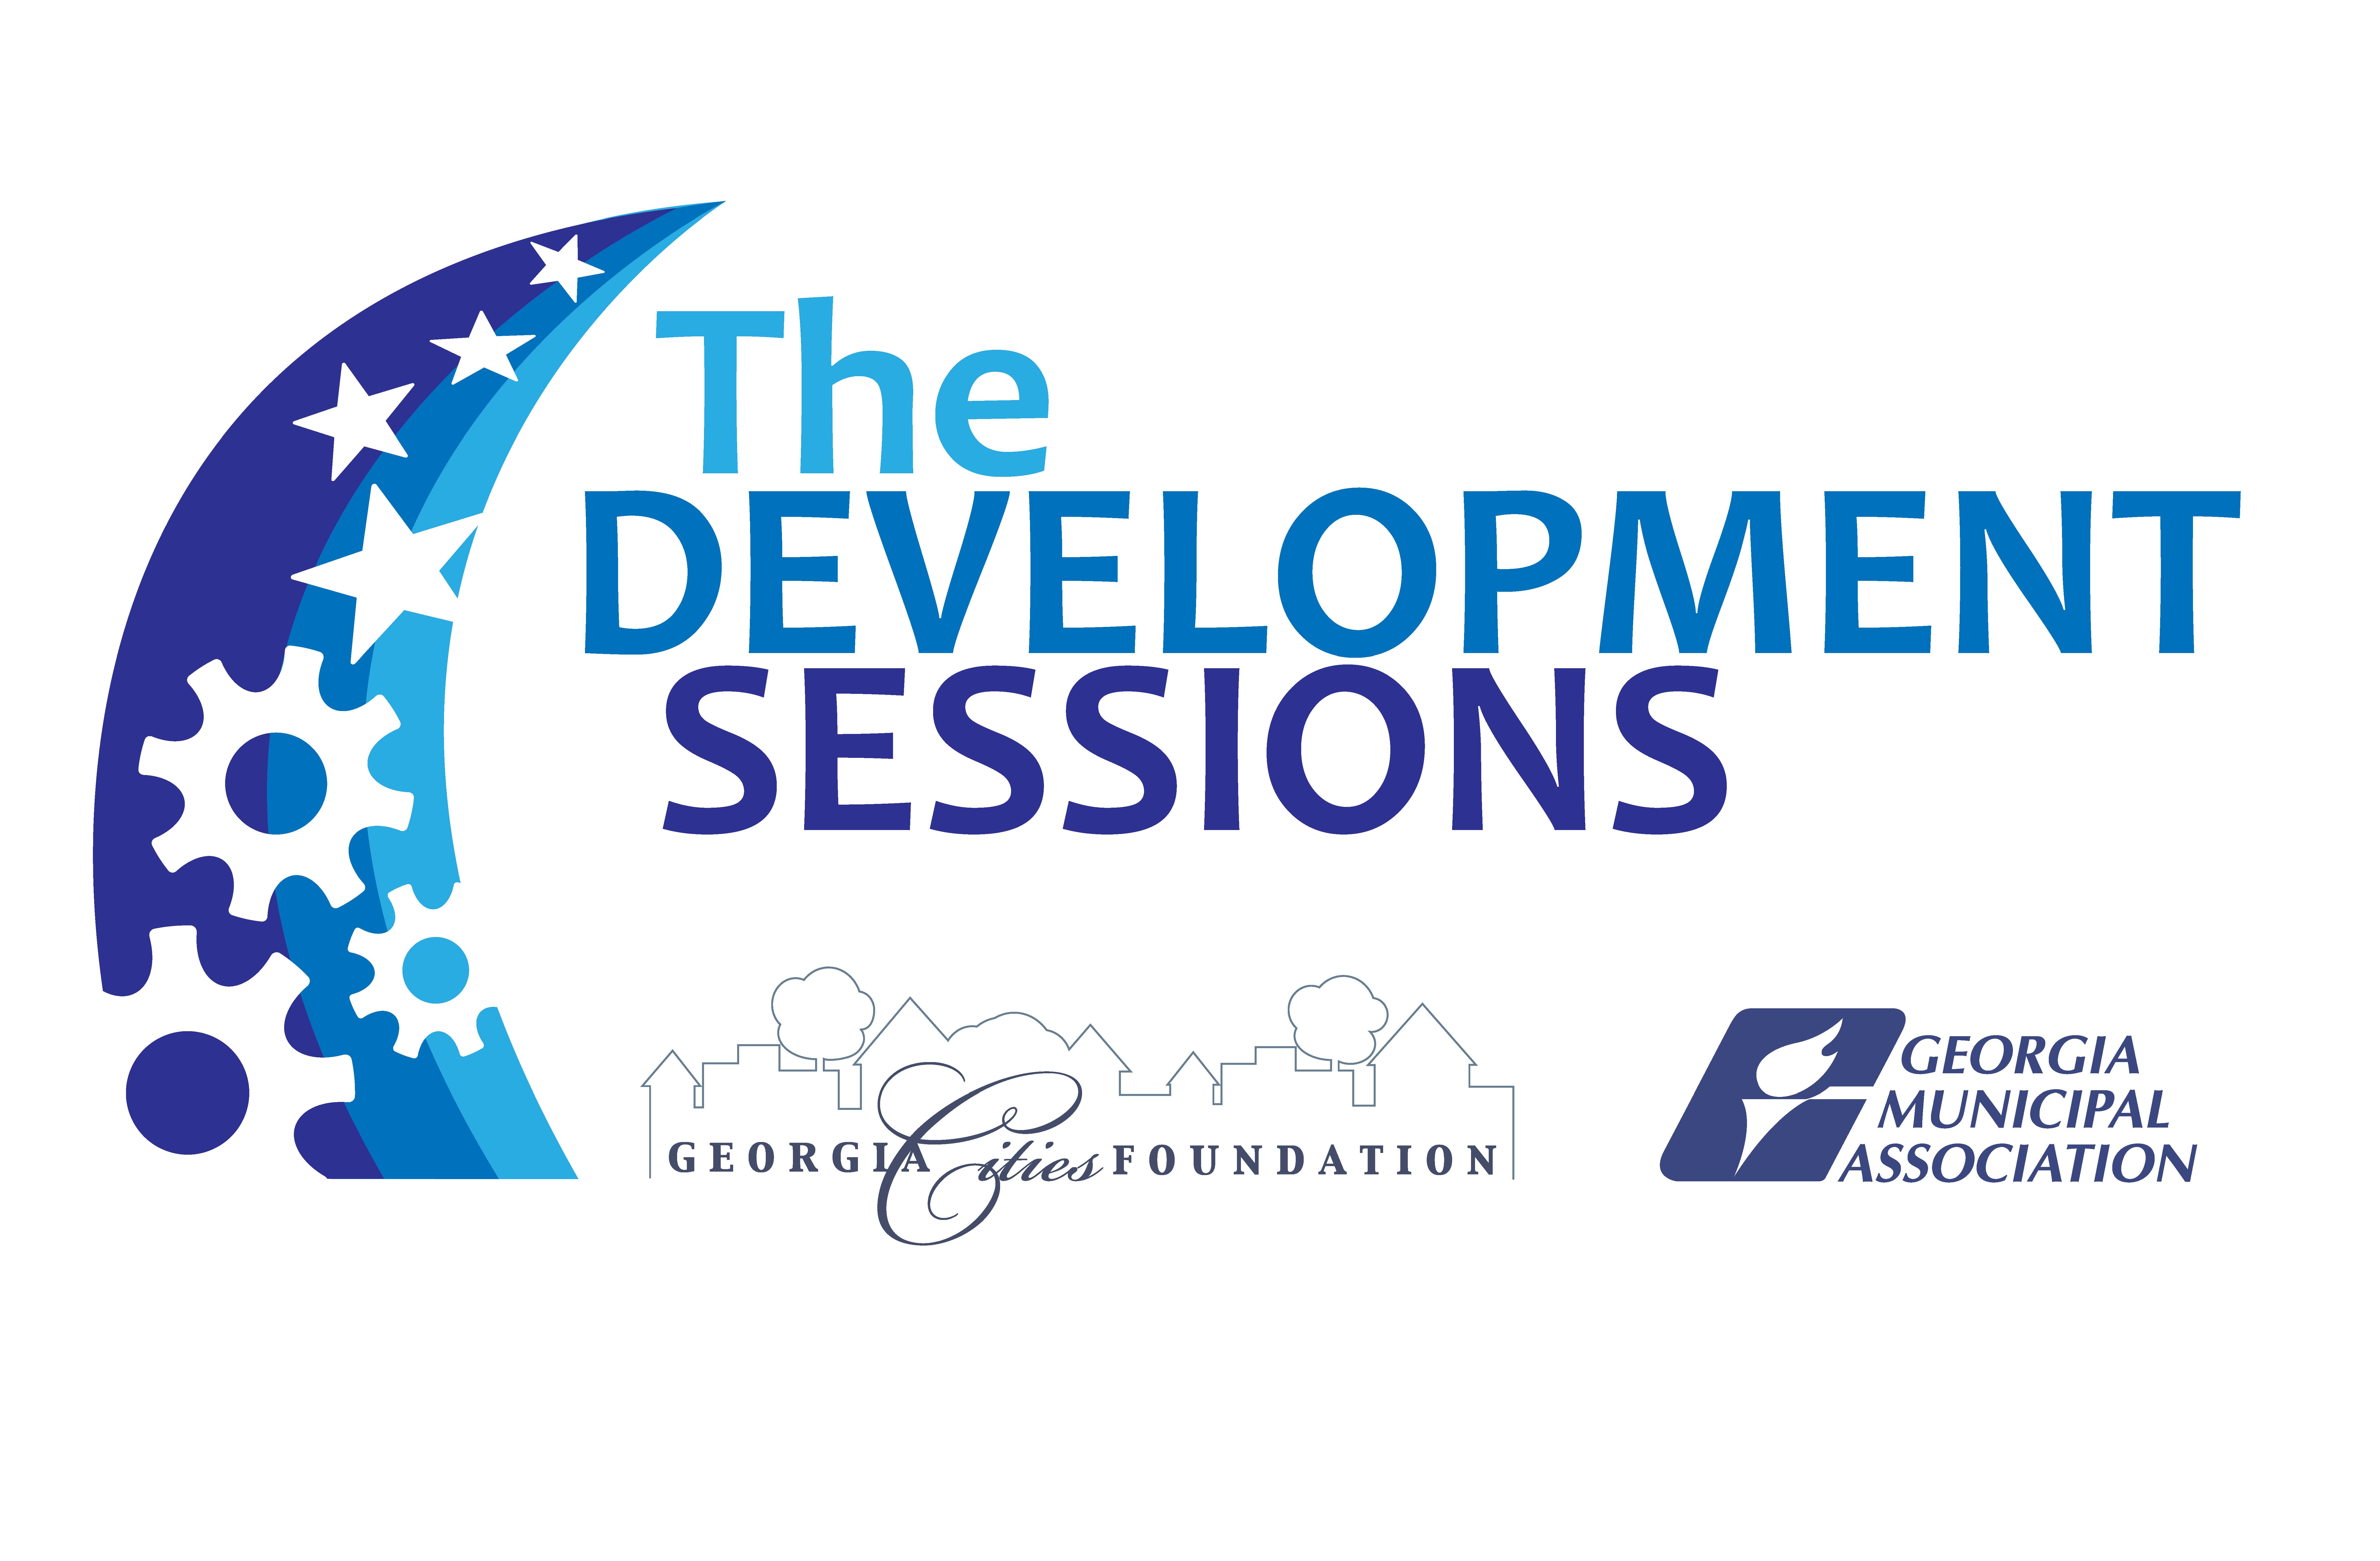 The Development Sessions